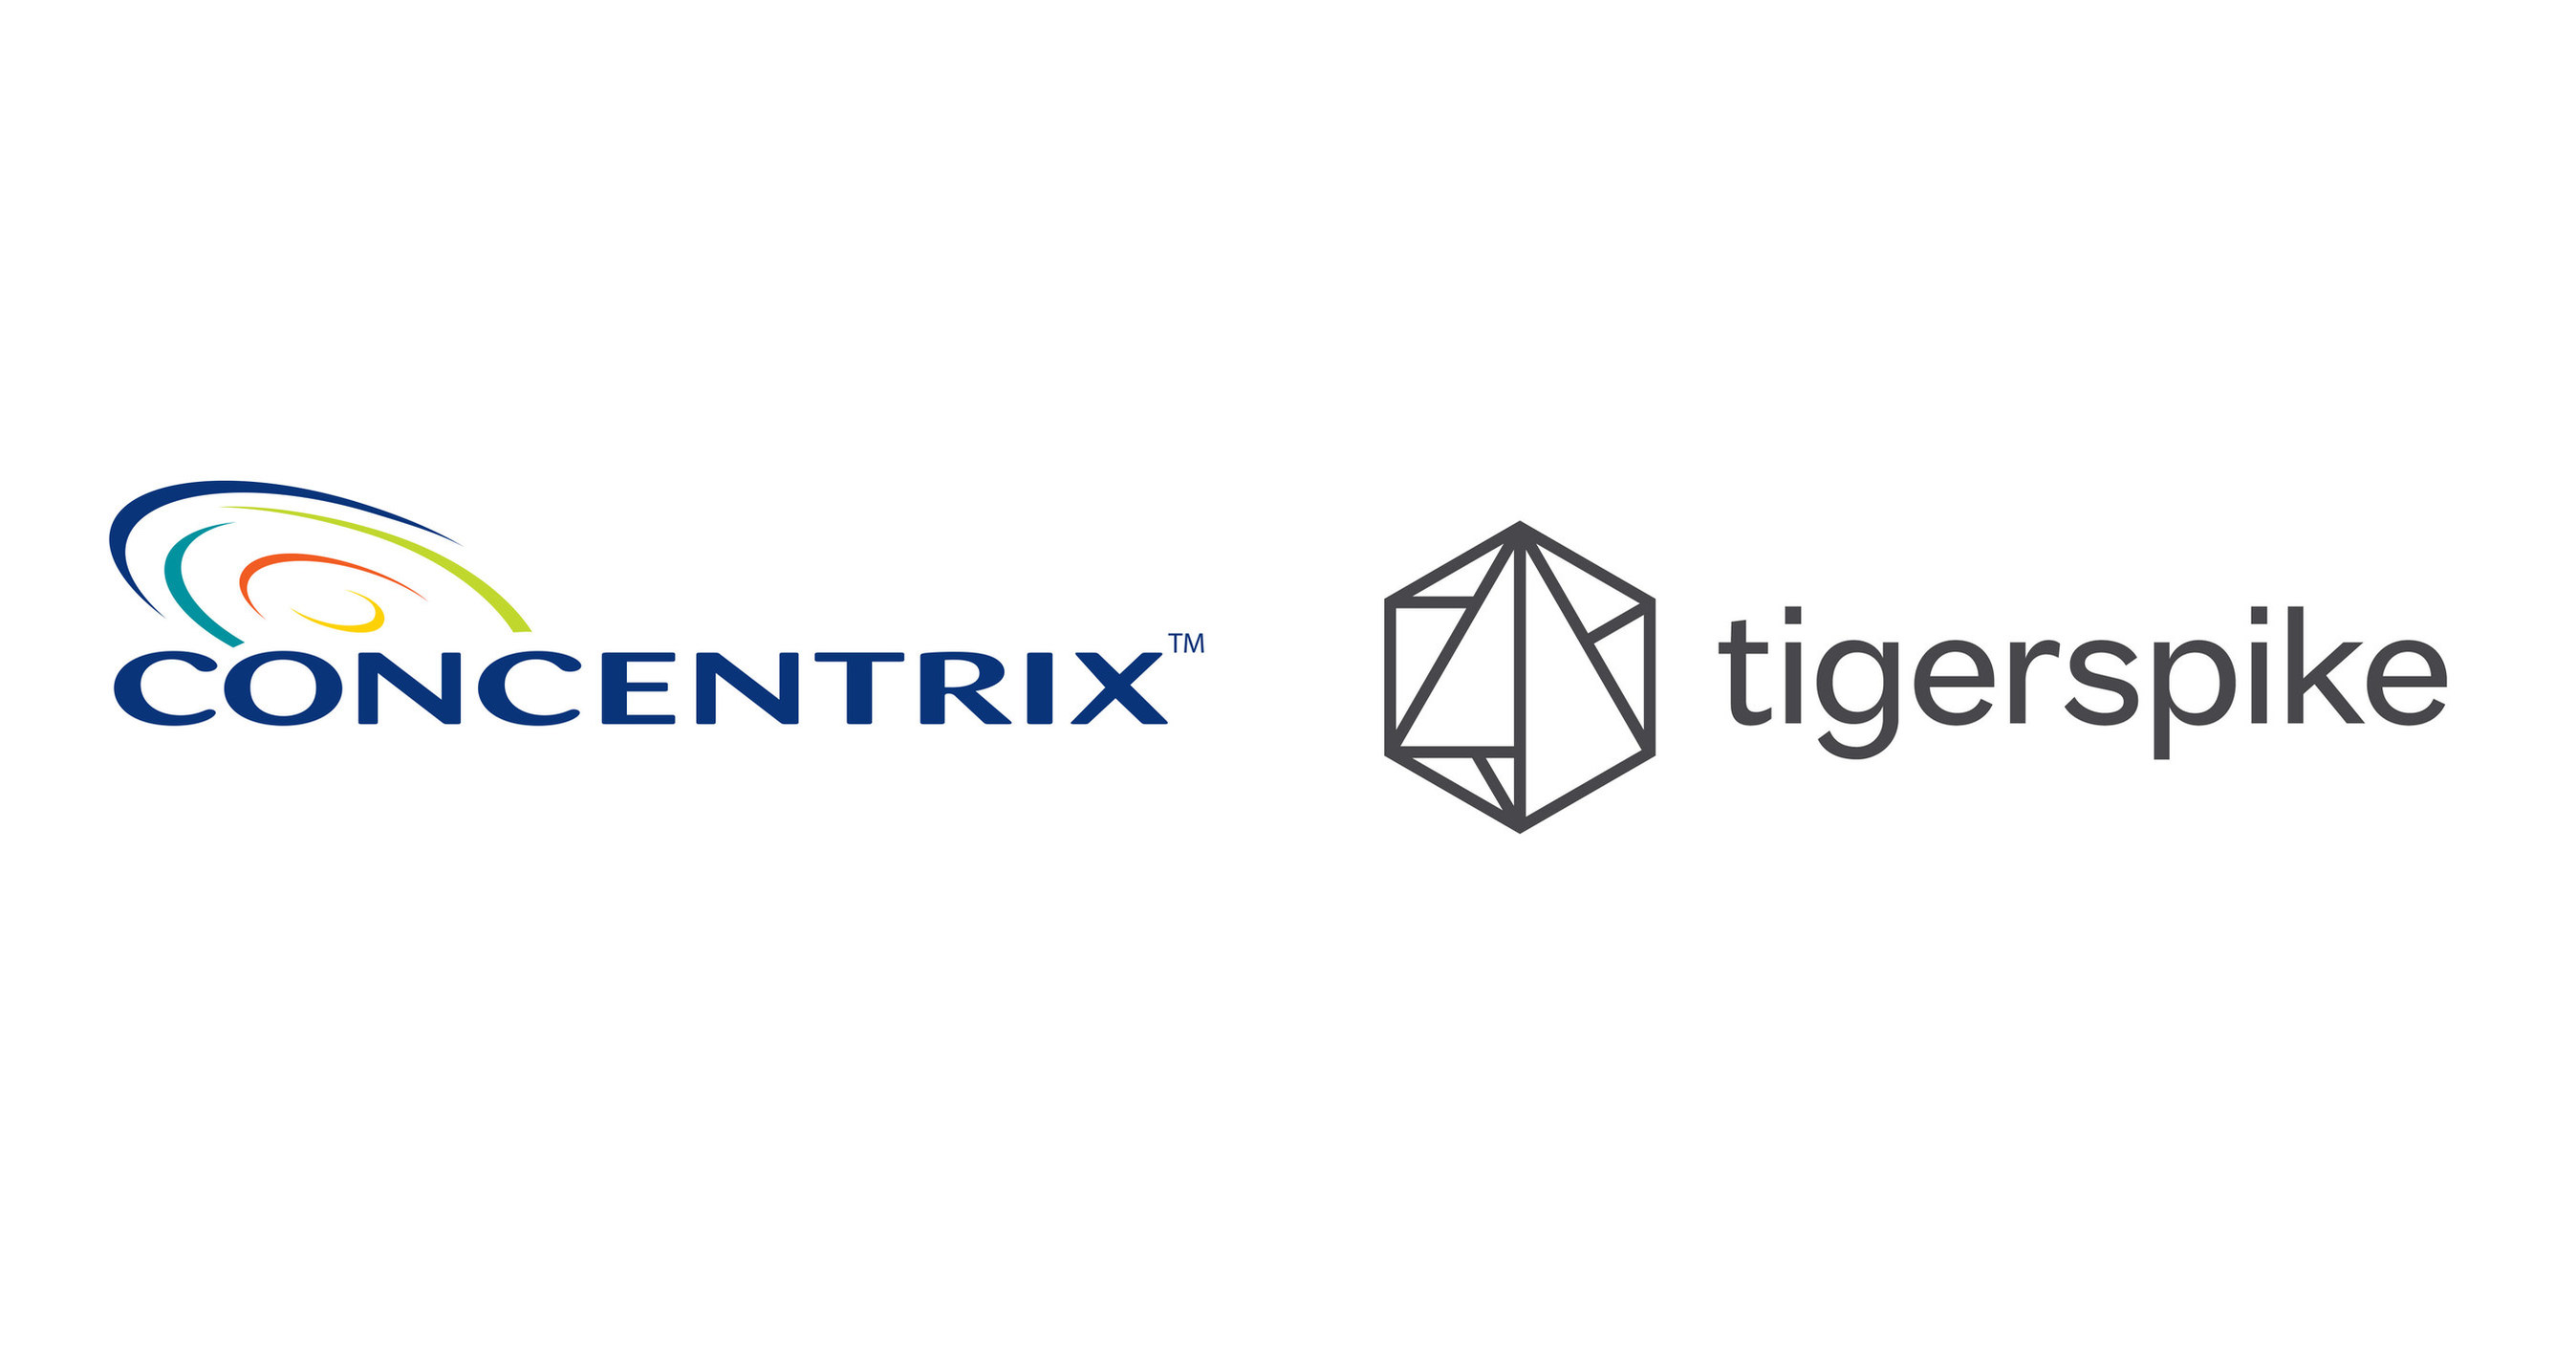 Concentrix Closes Acquisition of Tigerspike